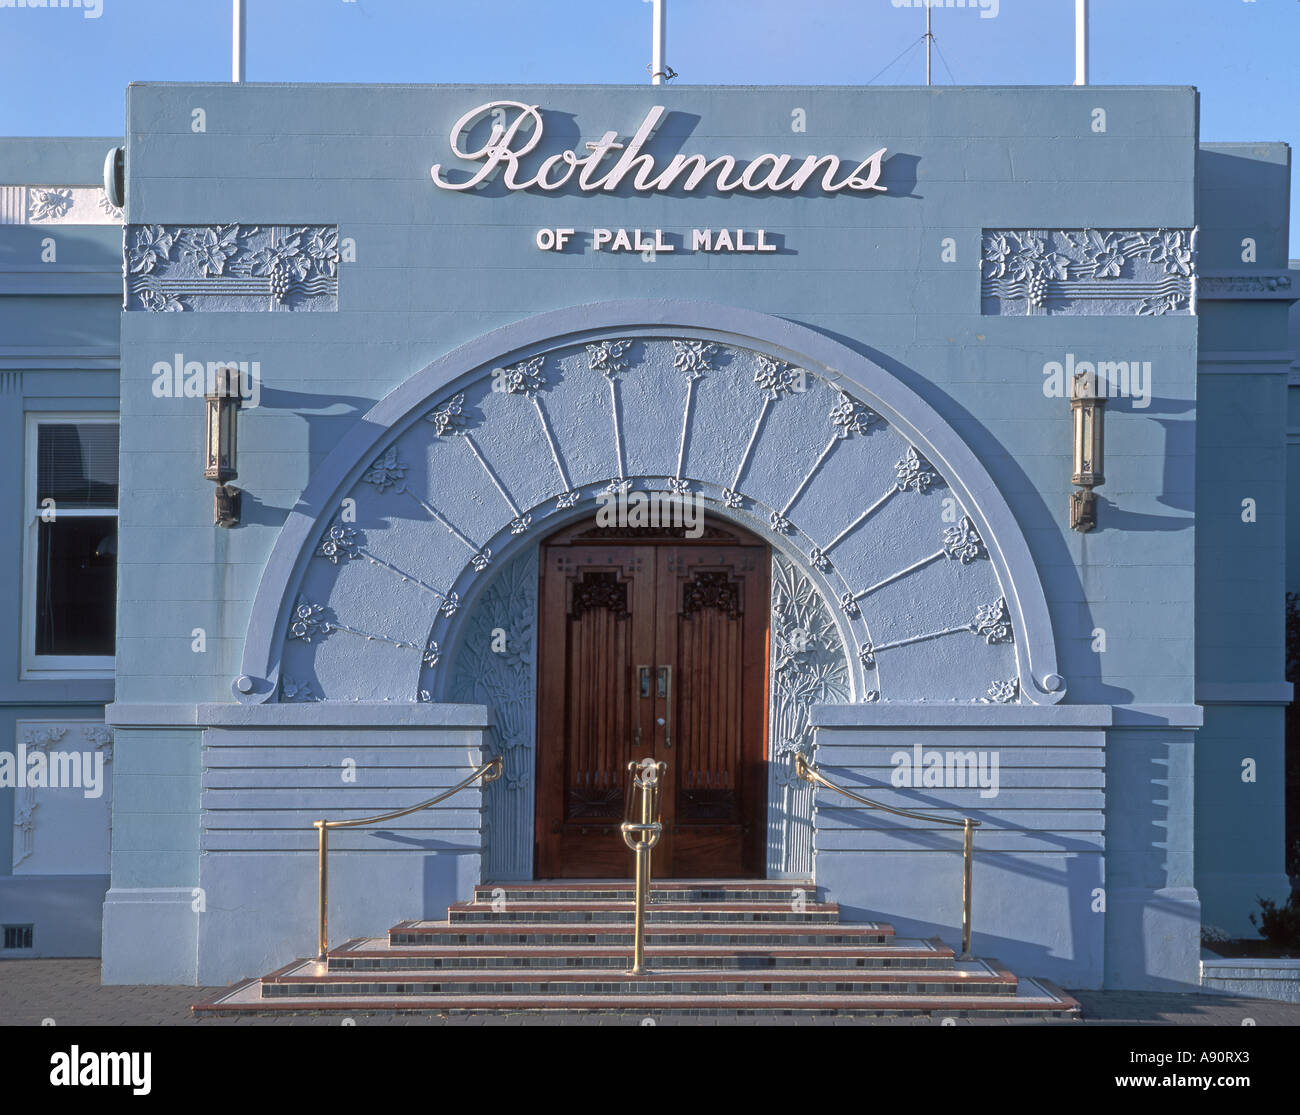 new zealand South island Napier art deco building Rothmans of Pall Mall entrance tabacco factory Stock Photo